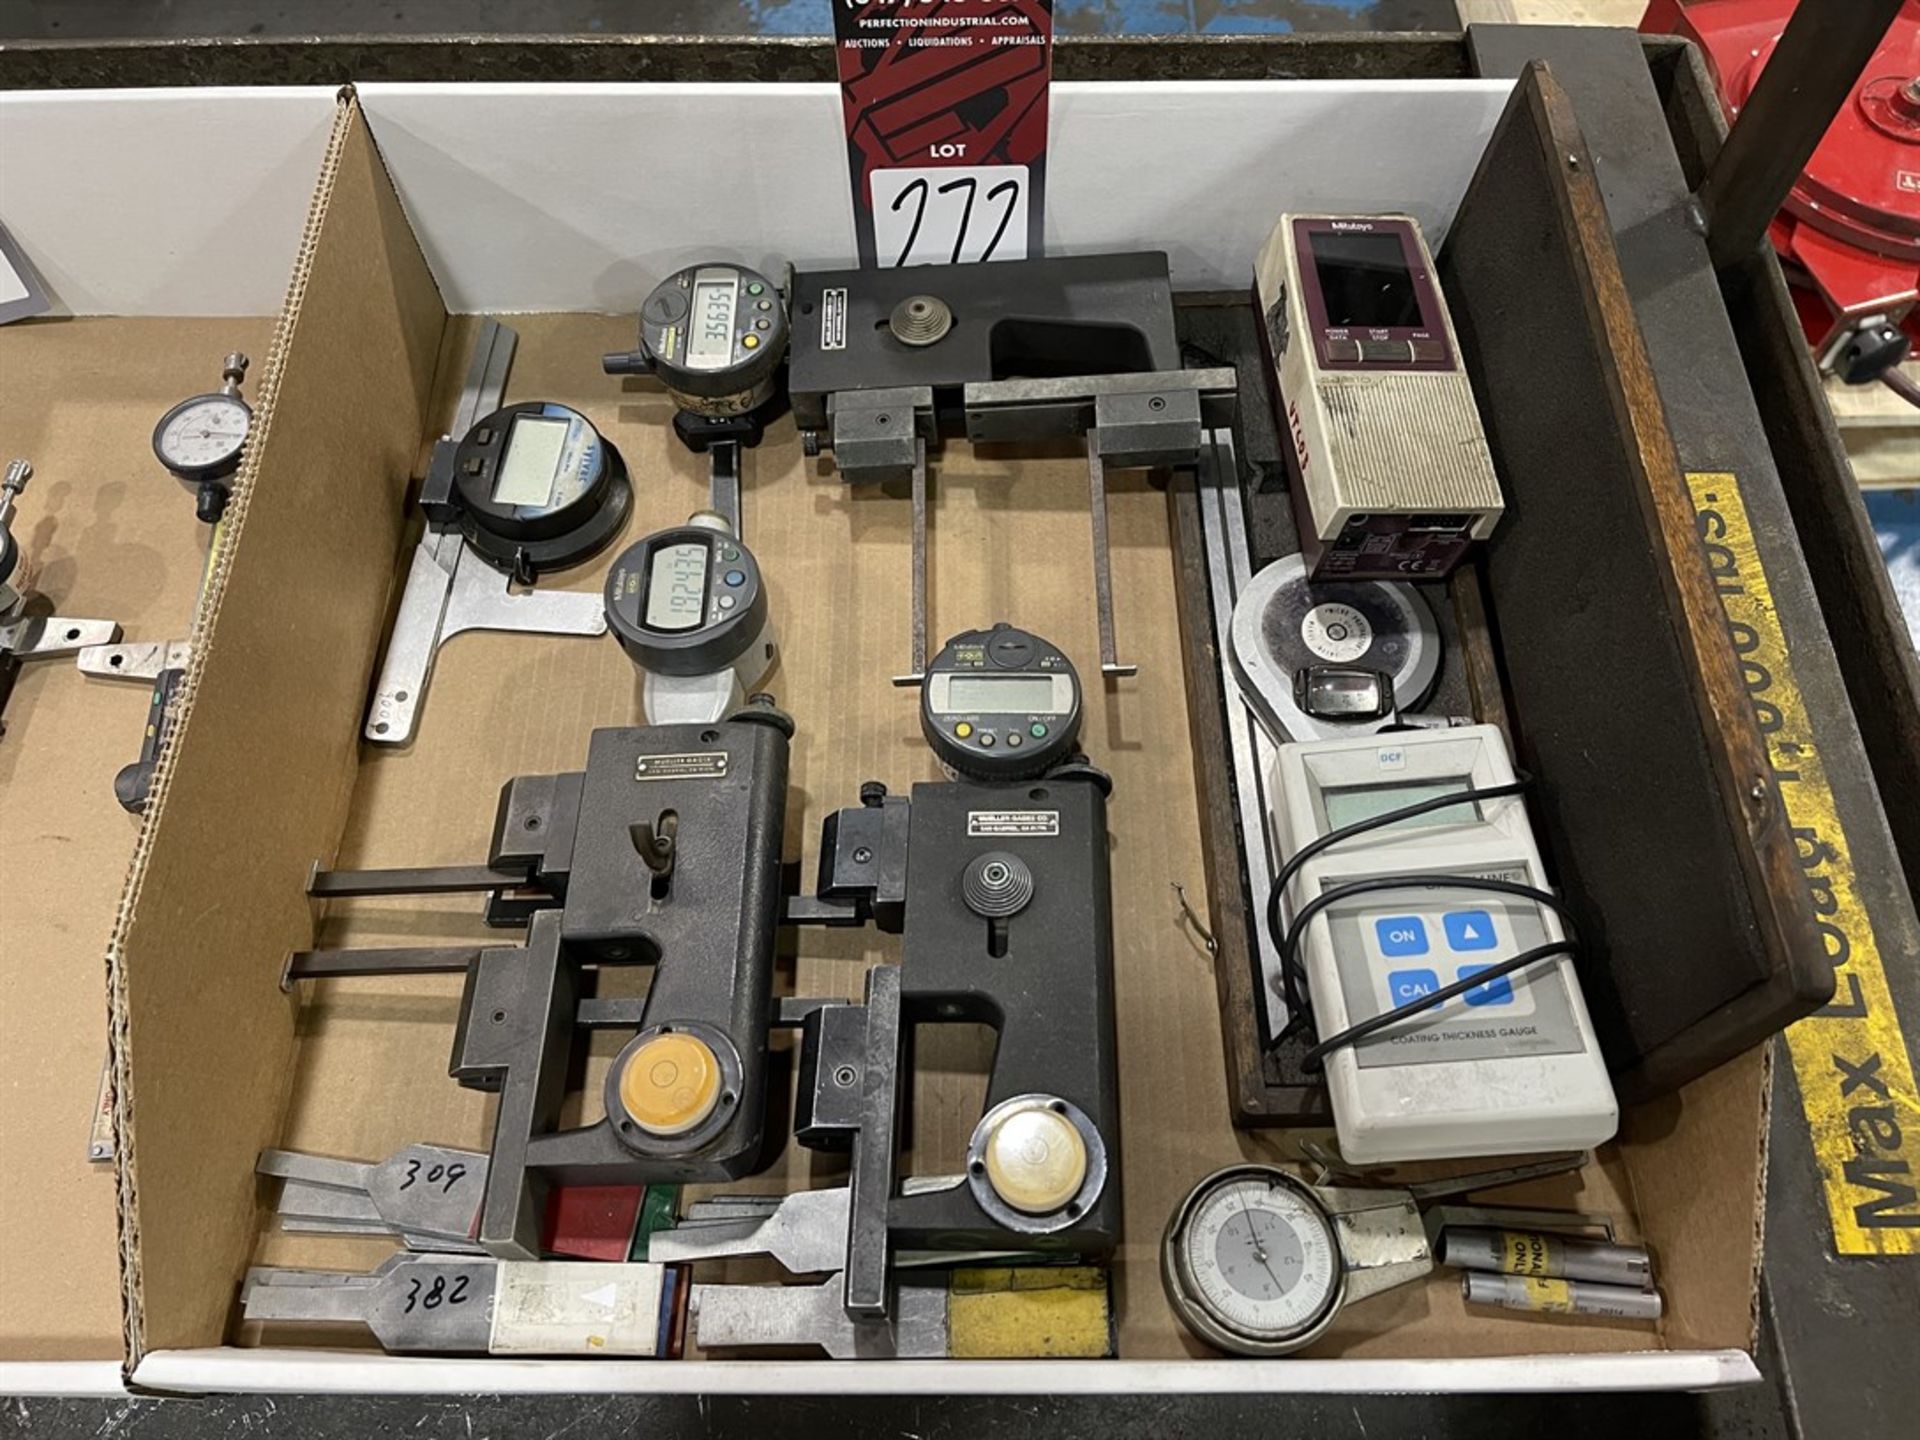 Lot MUELLER 179 Grove Diameter Gages, Depth Gage, DCF Coating Thickness Gage, Protractor, Mitutoyo